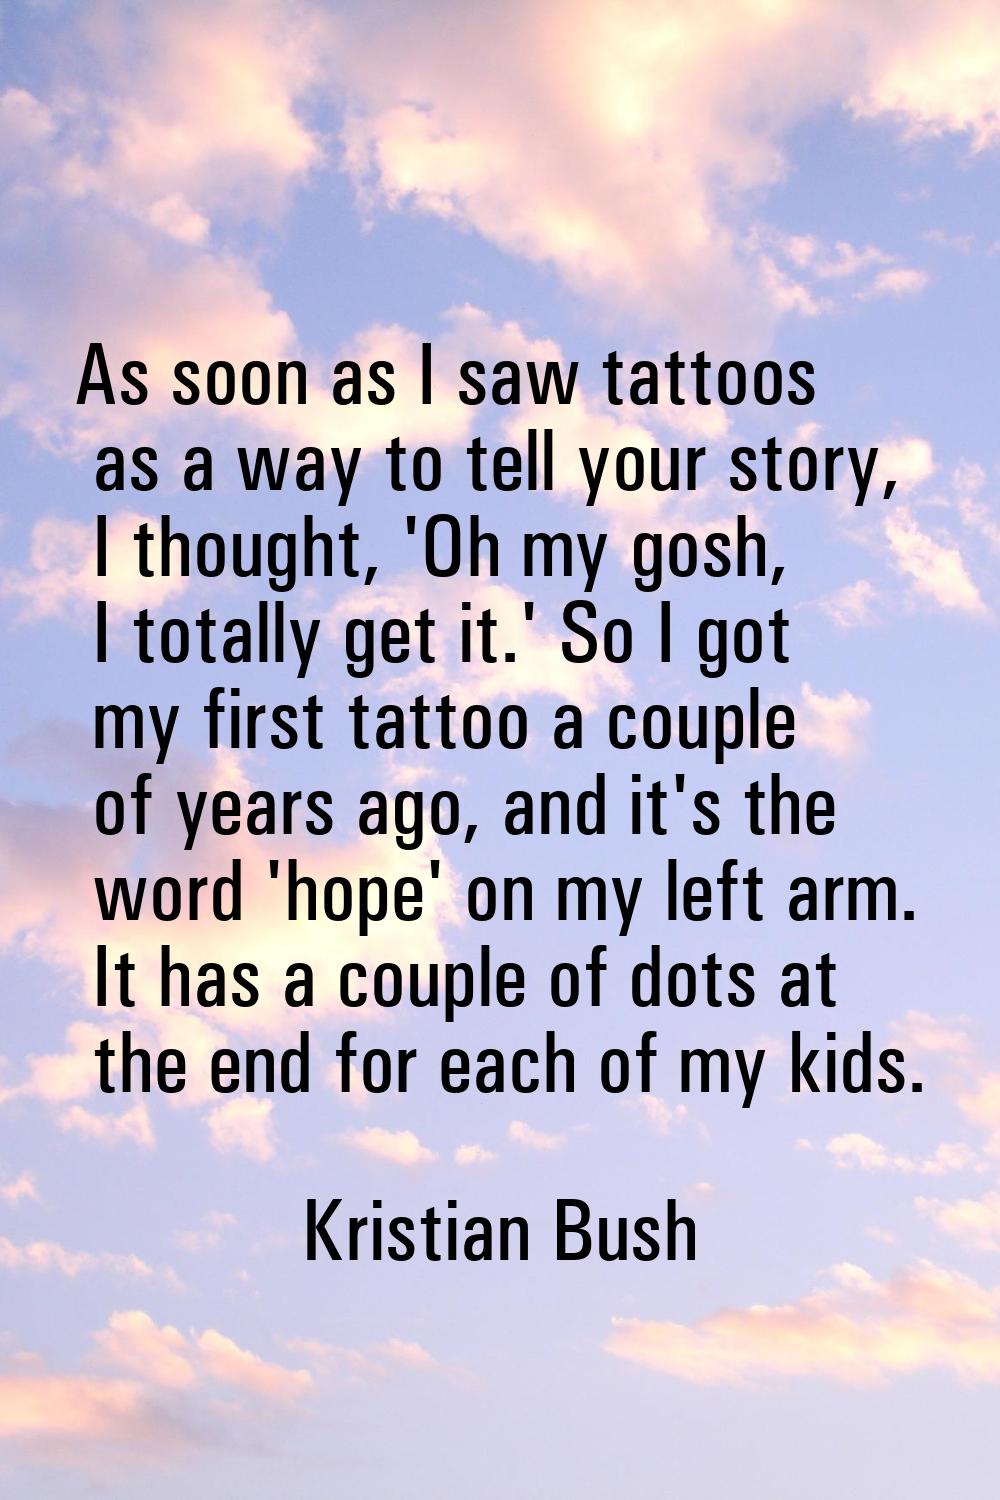 As soon as I saw tattoos as a way to tell your story, I thought, 'Oh my gosh, I totally get it.' So